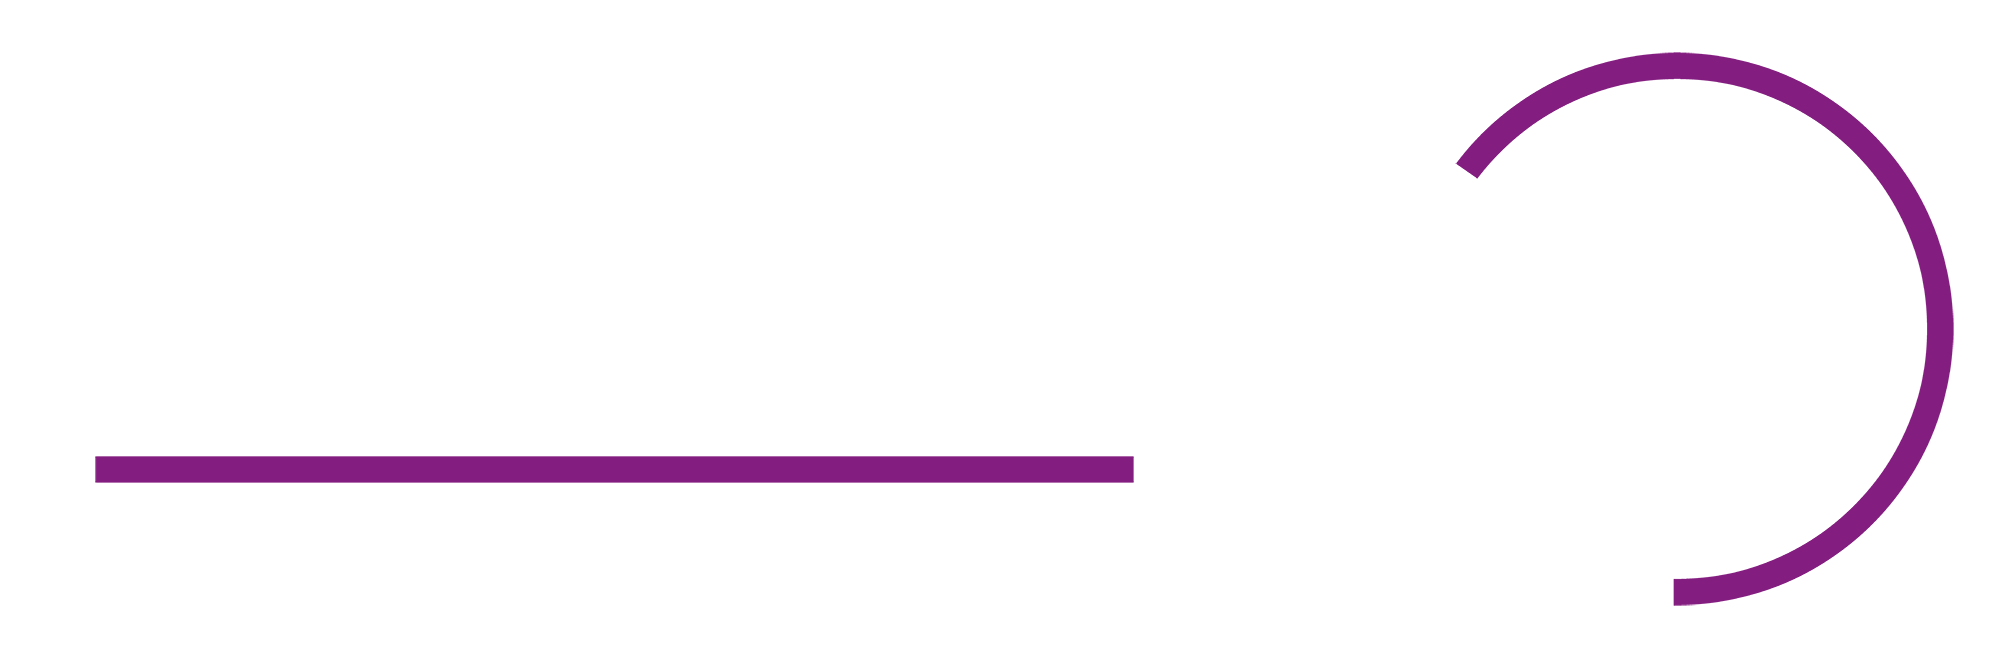 Real Equity Estate Agents